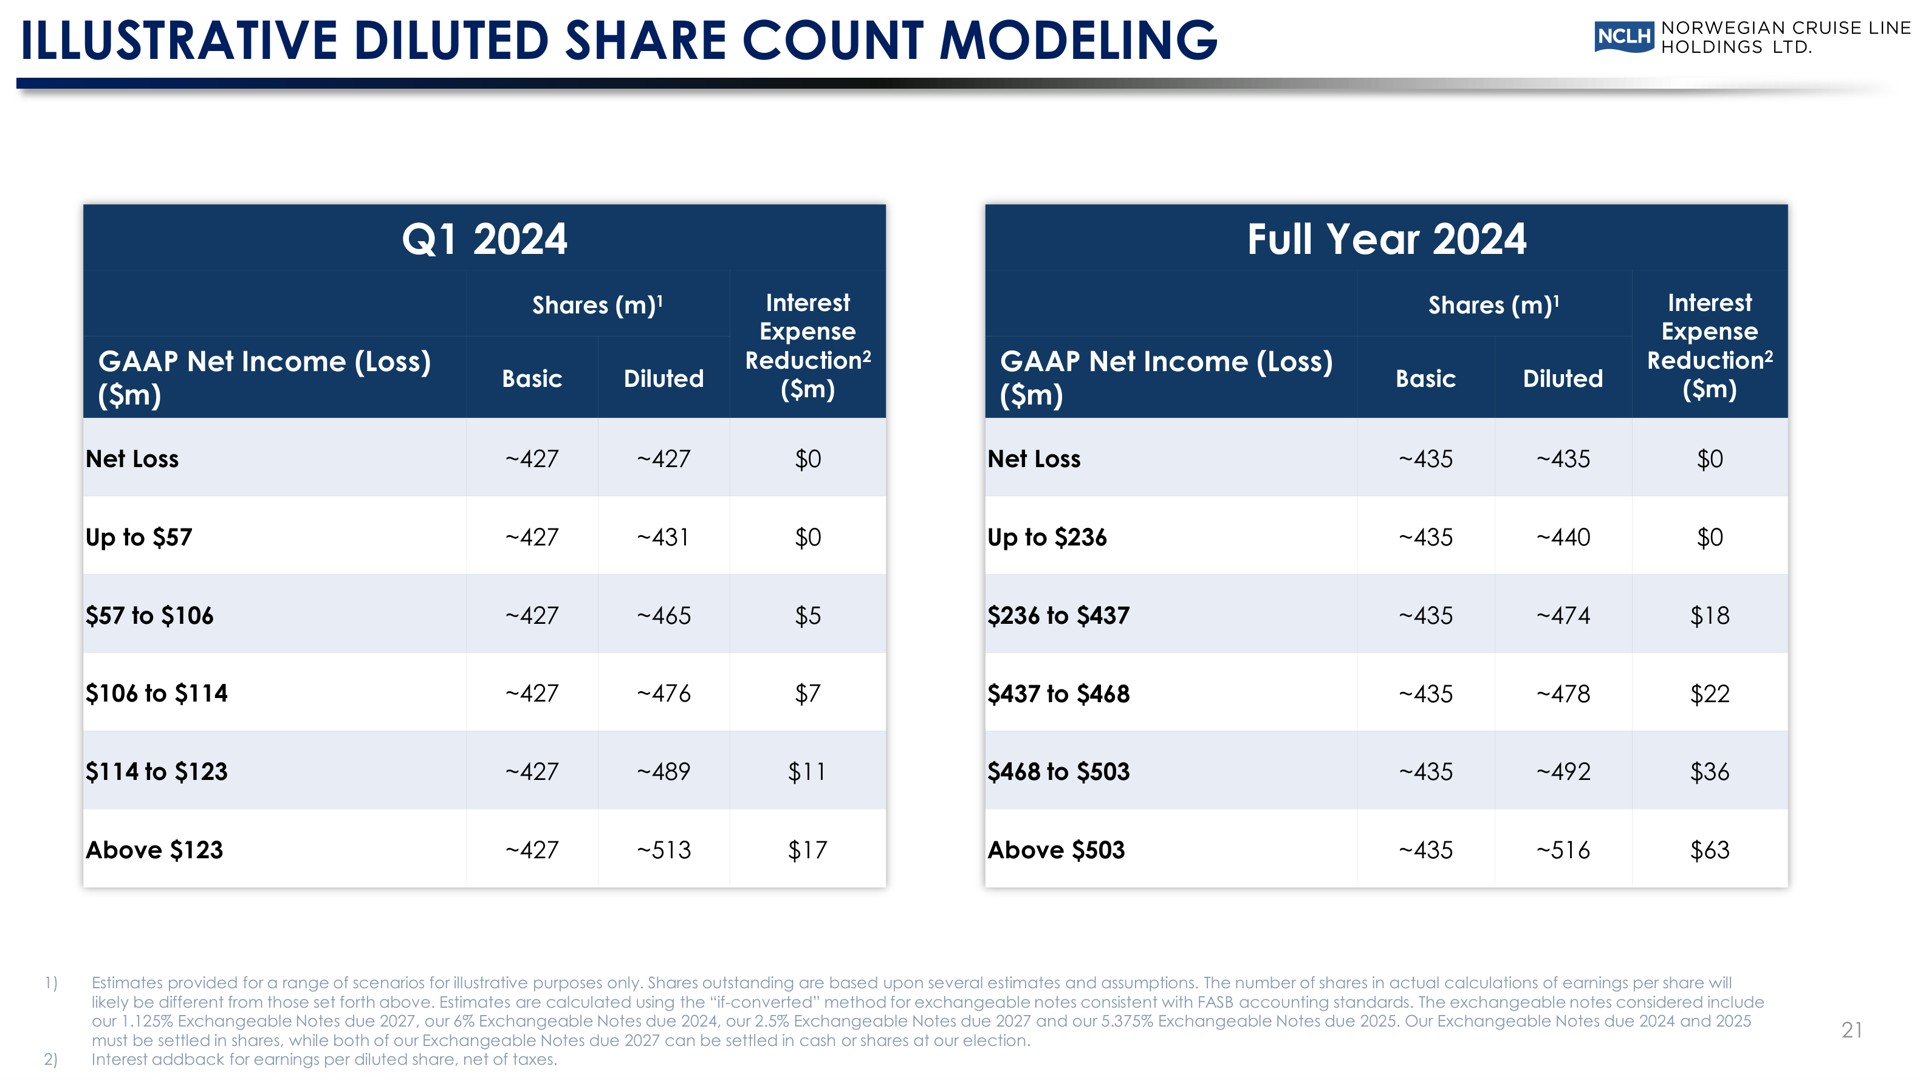 illustrative diluted share count modeling full year be sens | Norwegian Cruise Line